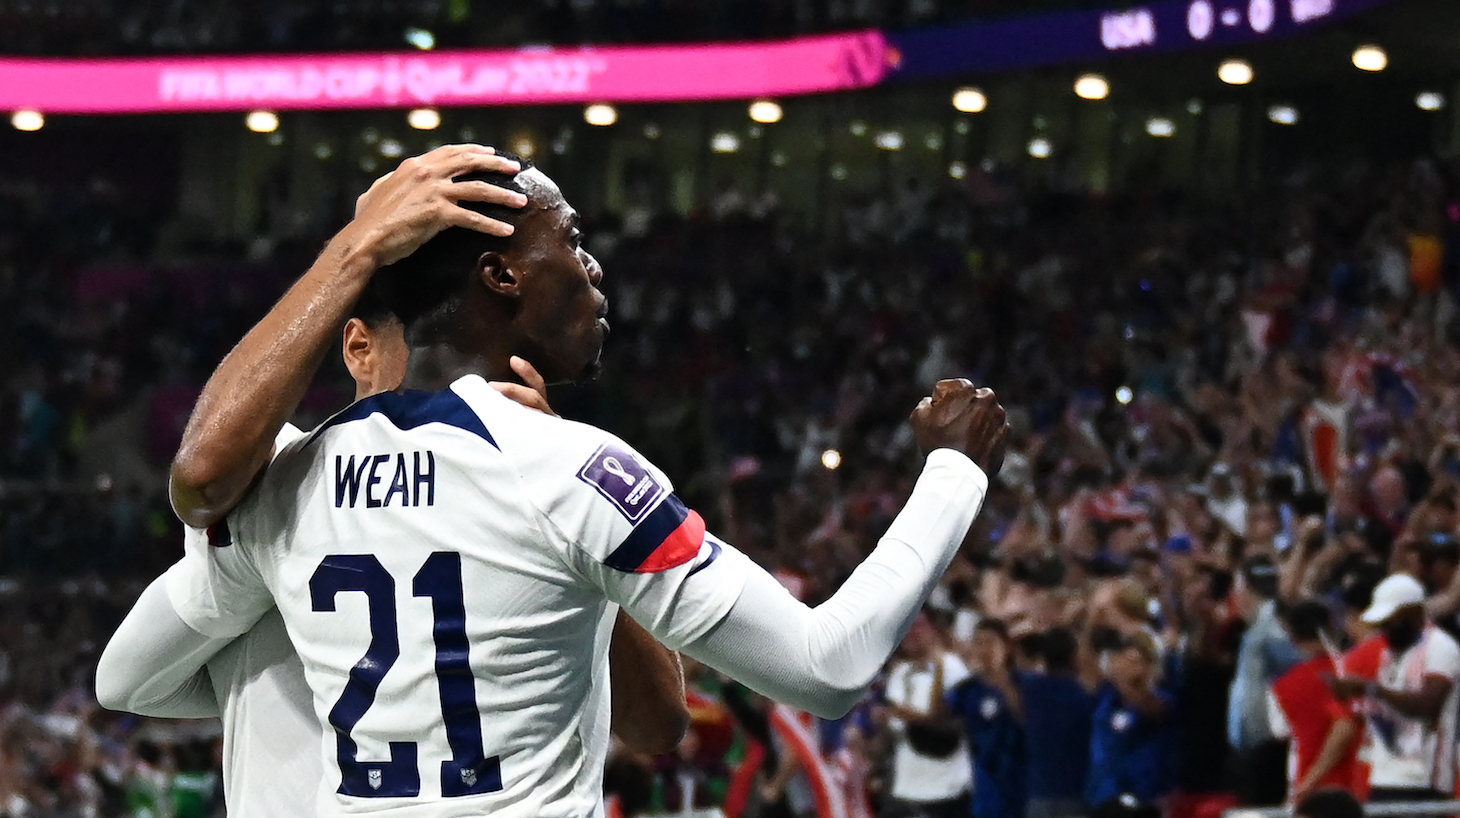 USA's forward #21 Timothy Weah celebrates after scoring his team's first goal during the Qatar 2022 World Cup Group B football match between USA and Wales at the Ahmad Bin Ali Stadium in Al-Rayyan, west of Doha on November 21, 2022.